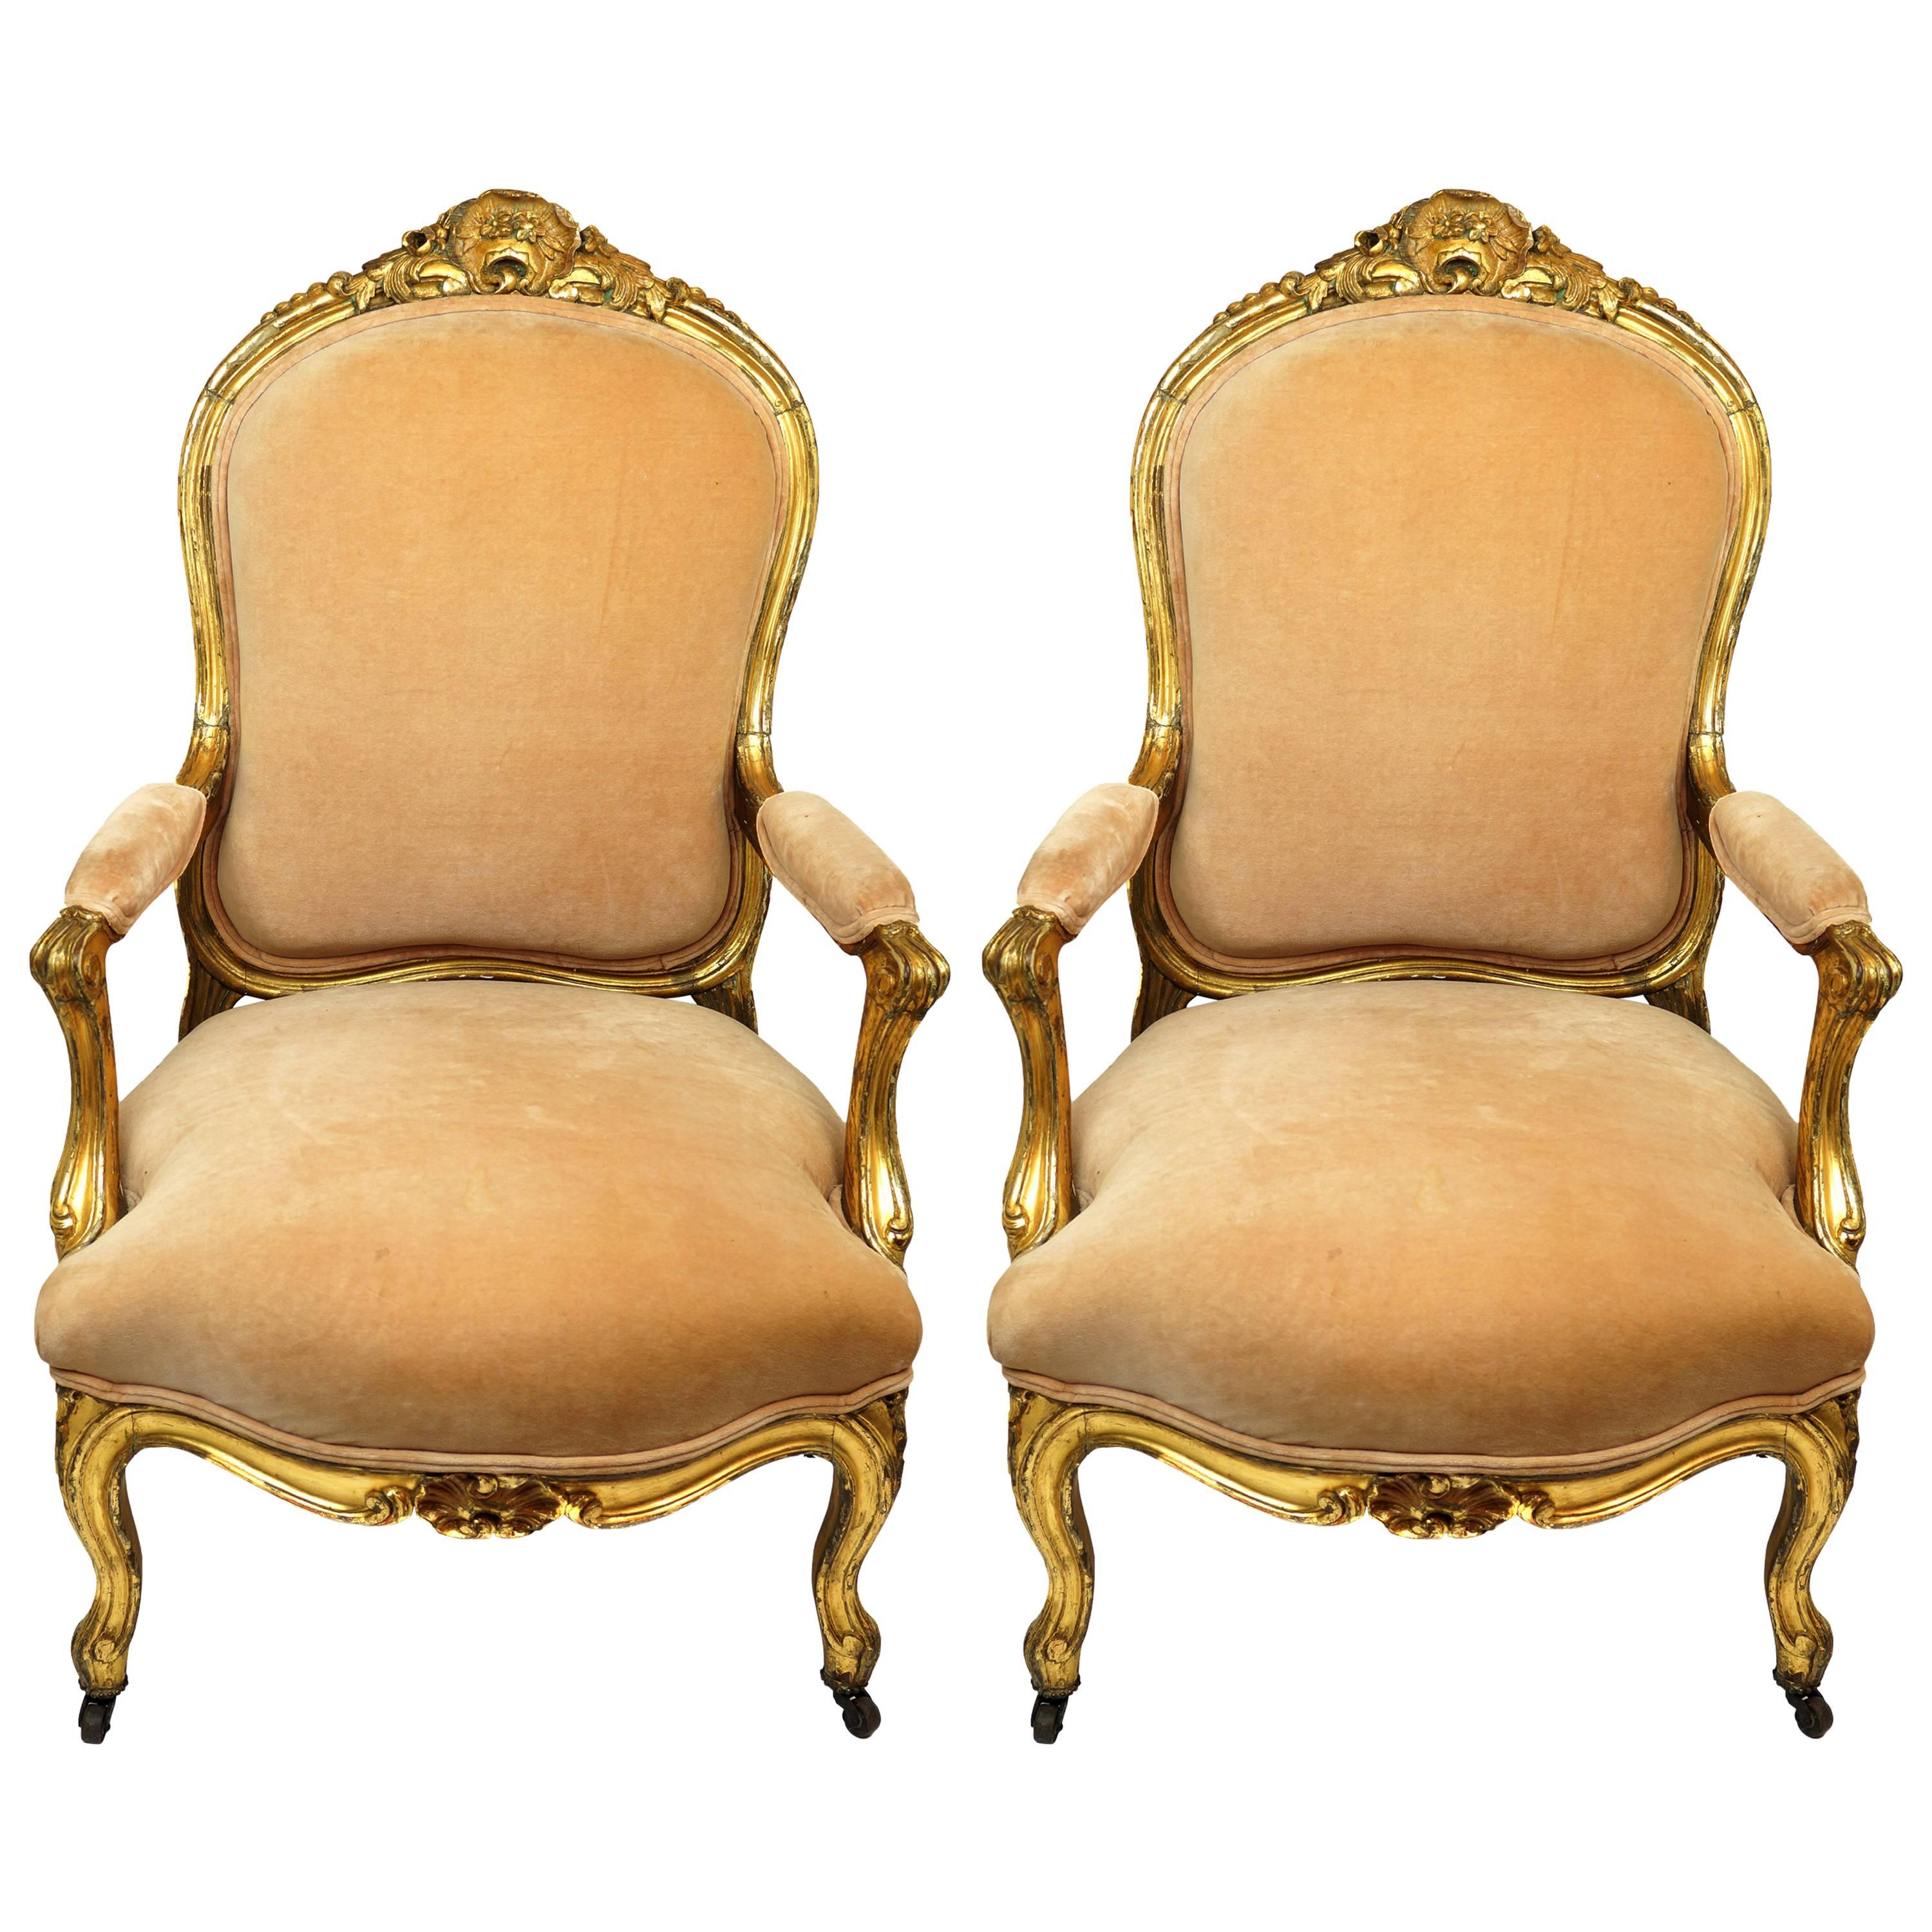 Pair of Louis XV Style Carved Giltwood Amchairs